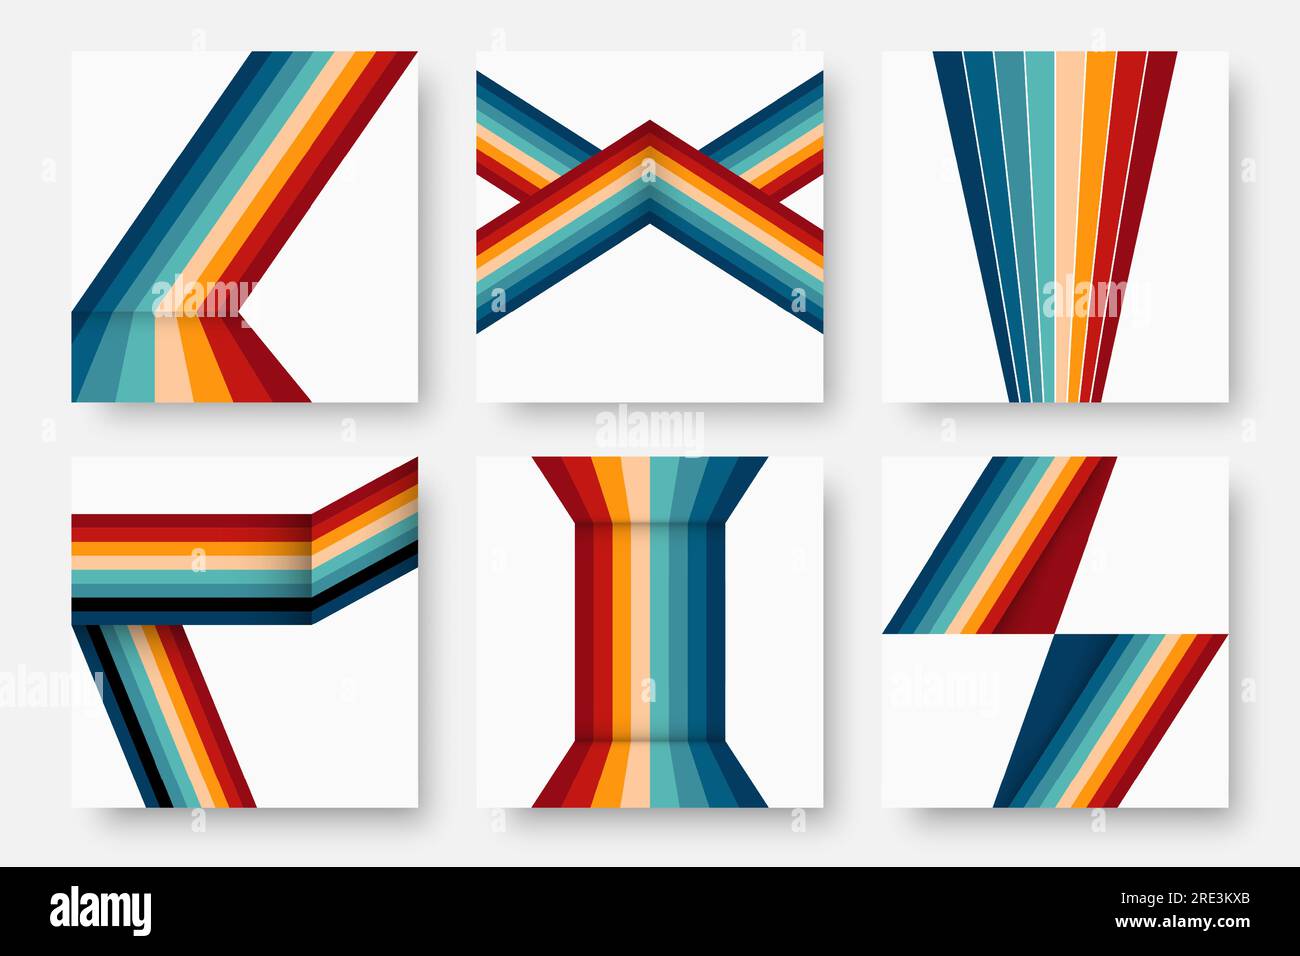 Set of 60s, 70s, 80s retro banners. Colored stripes and lines.Abstract background. Stock Vector